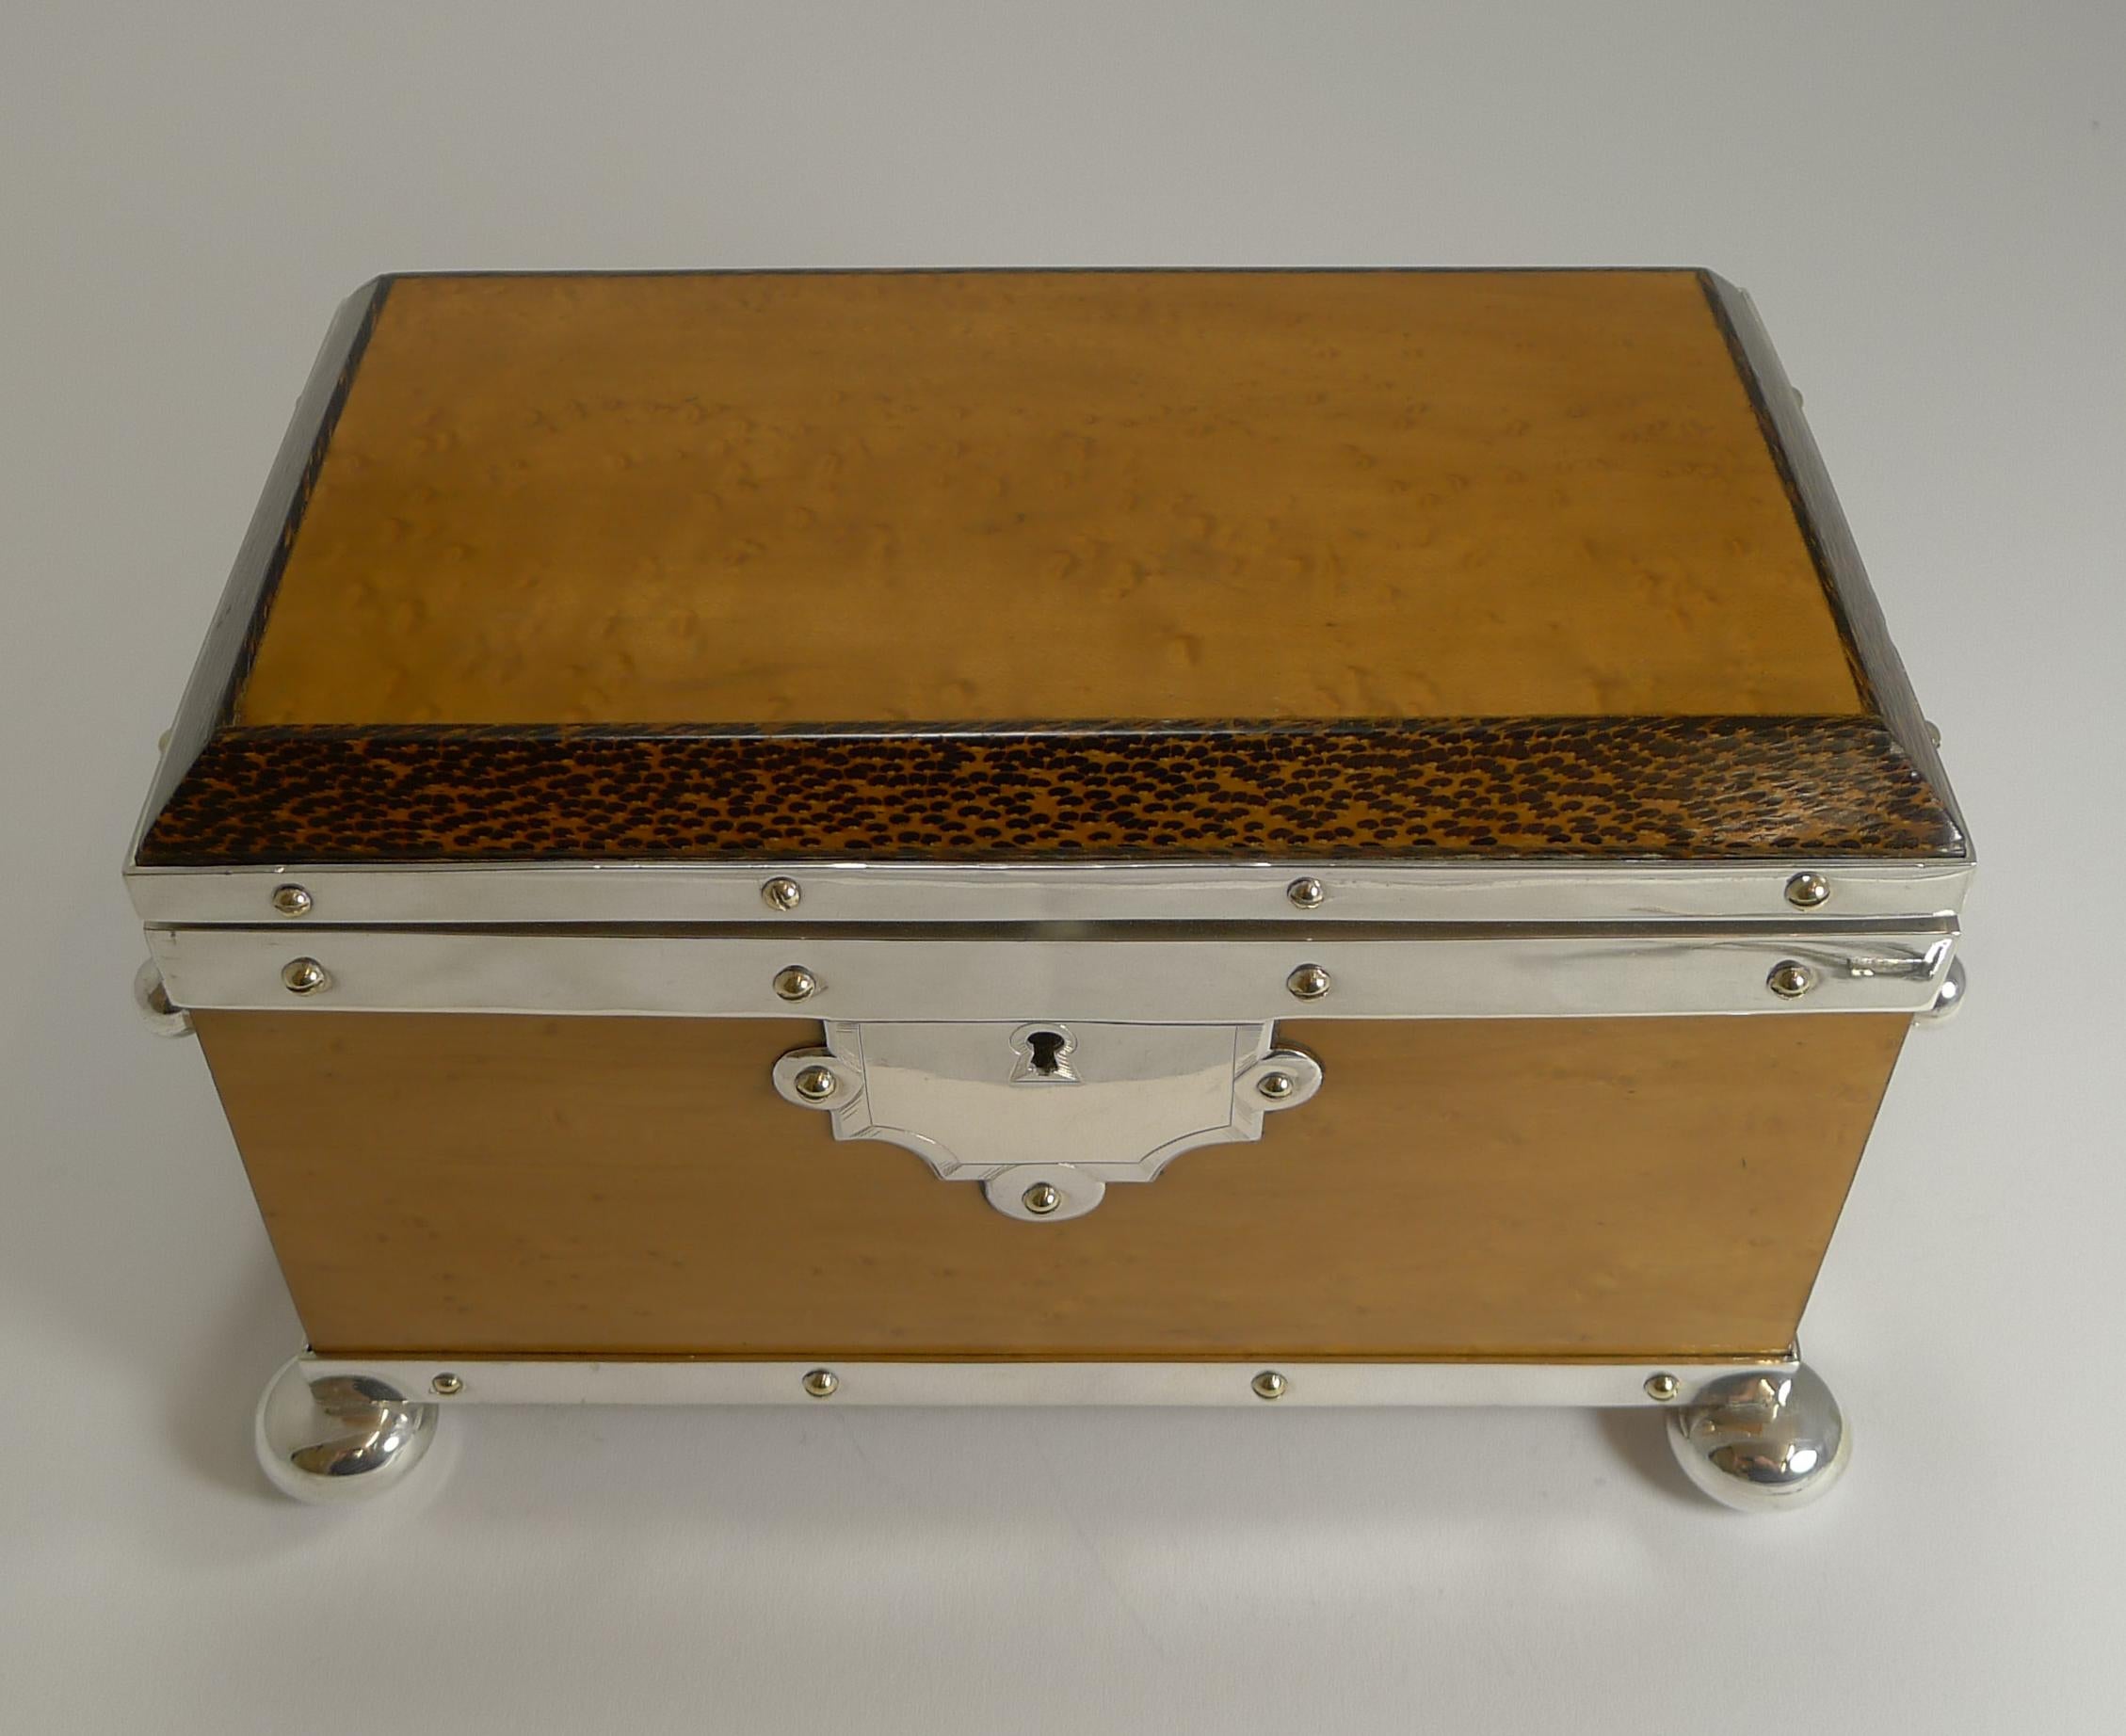 Late 19th Century Rare Silver Plated Mounted Bird's-Eye Maple and Palm Wood Tea Caddy, circa 1890